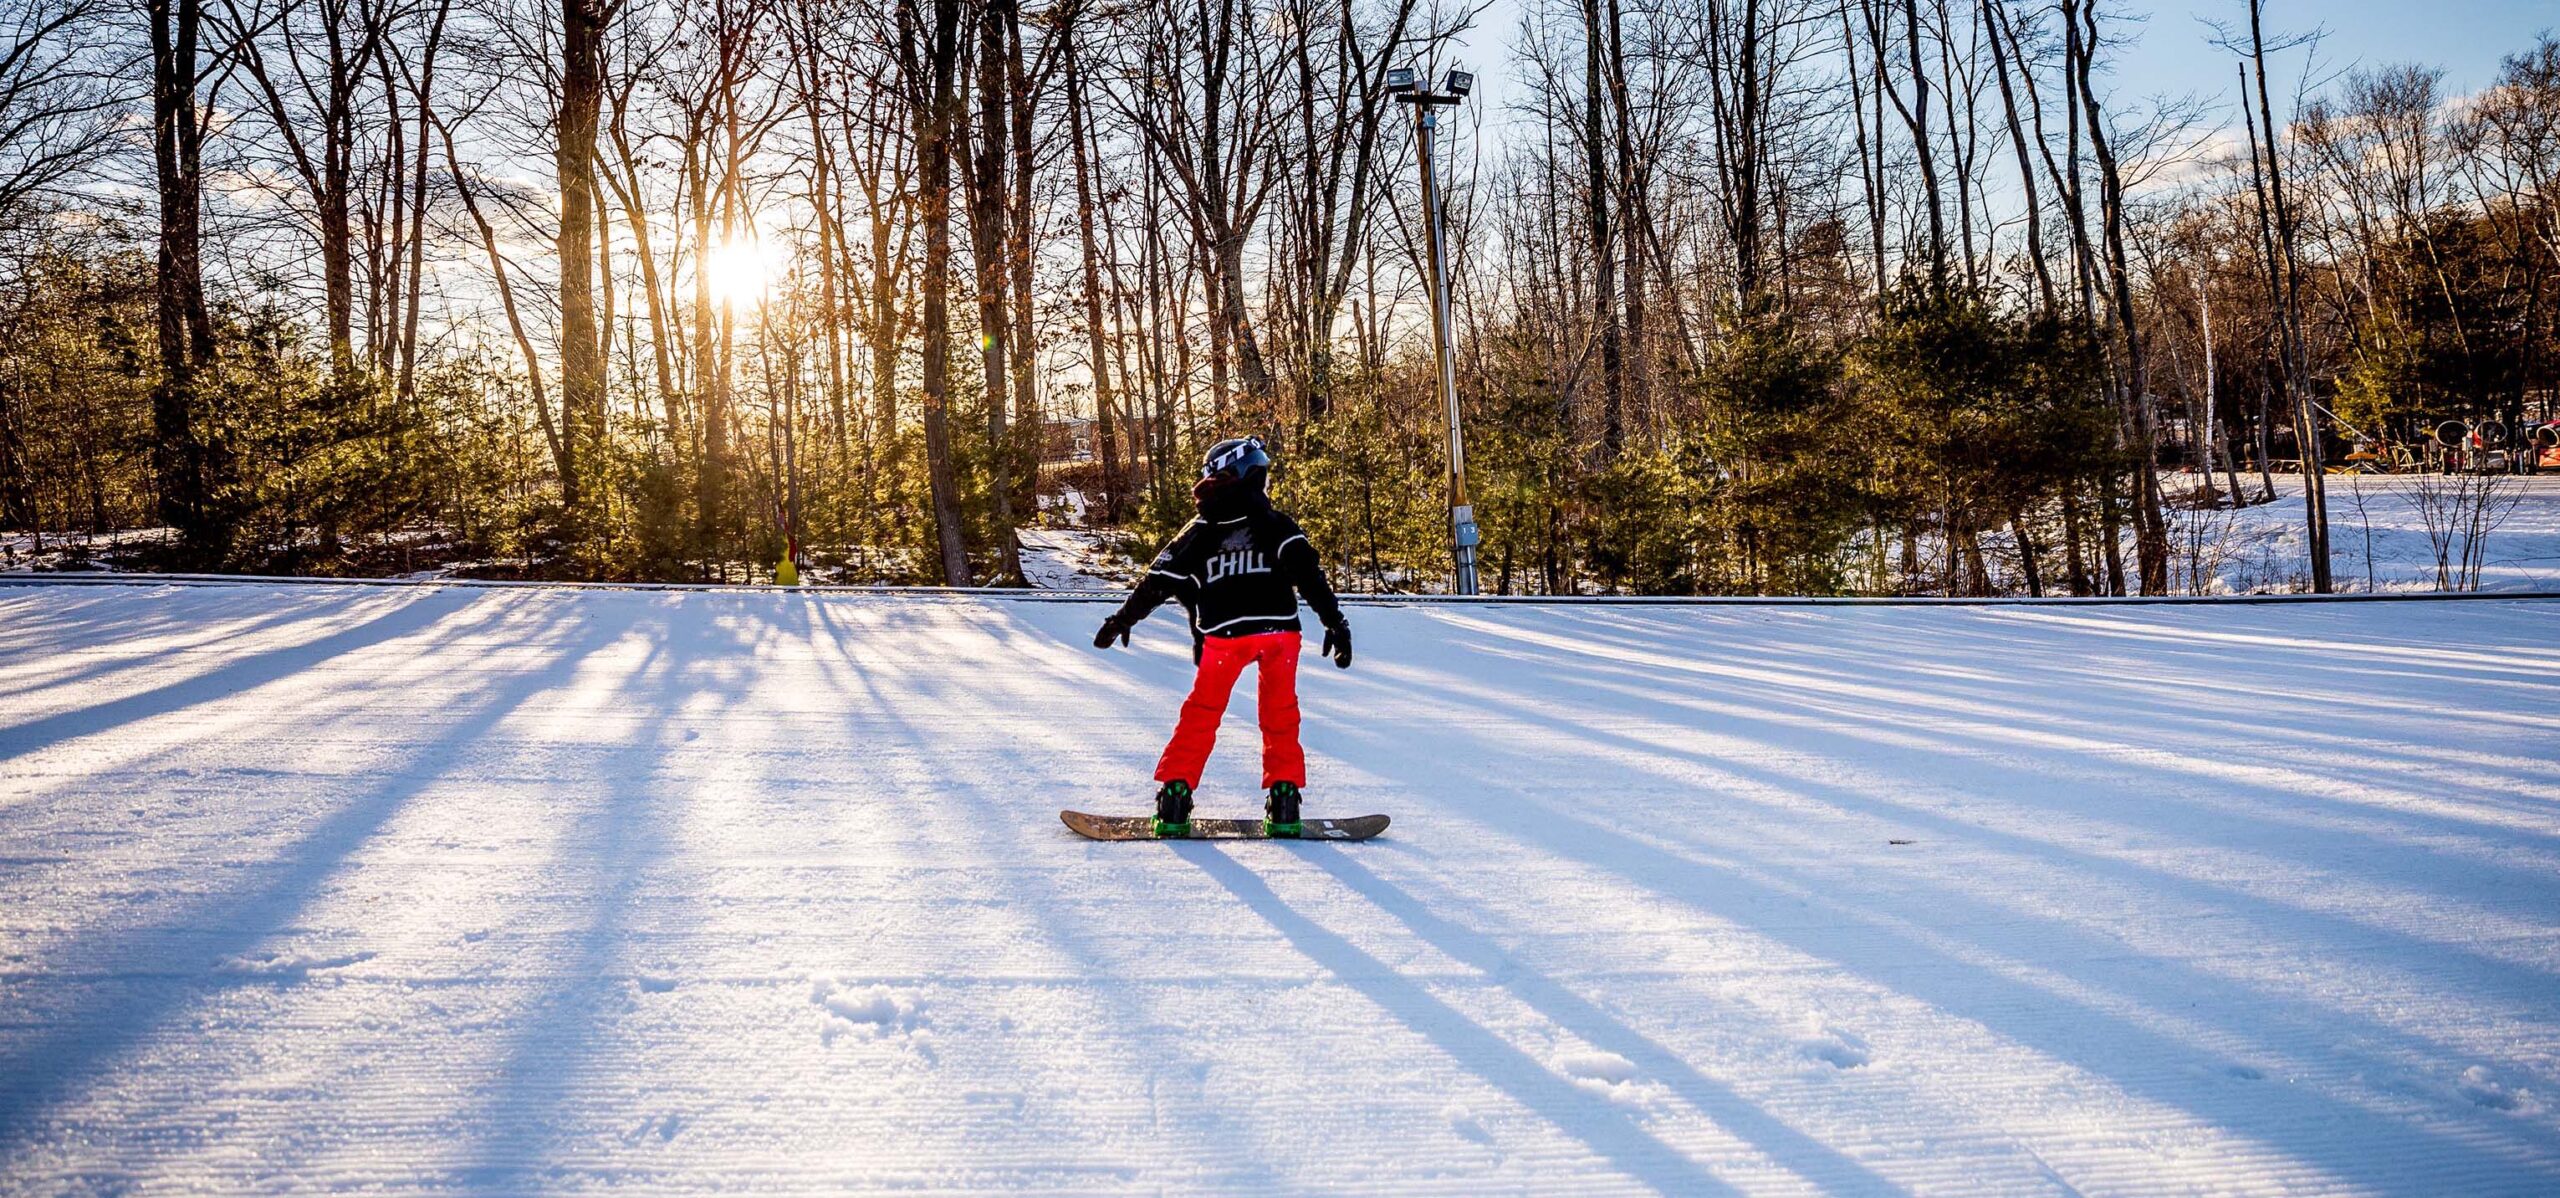 A chill youth snowboarding with the setting sun shining through trees in the background.